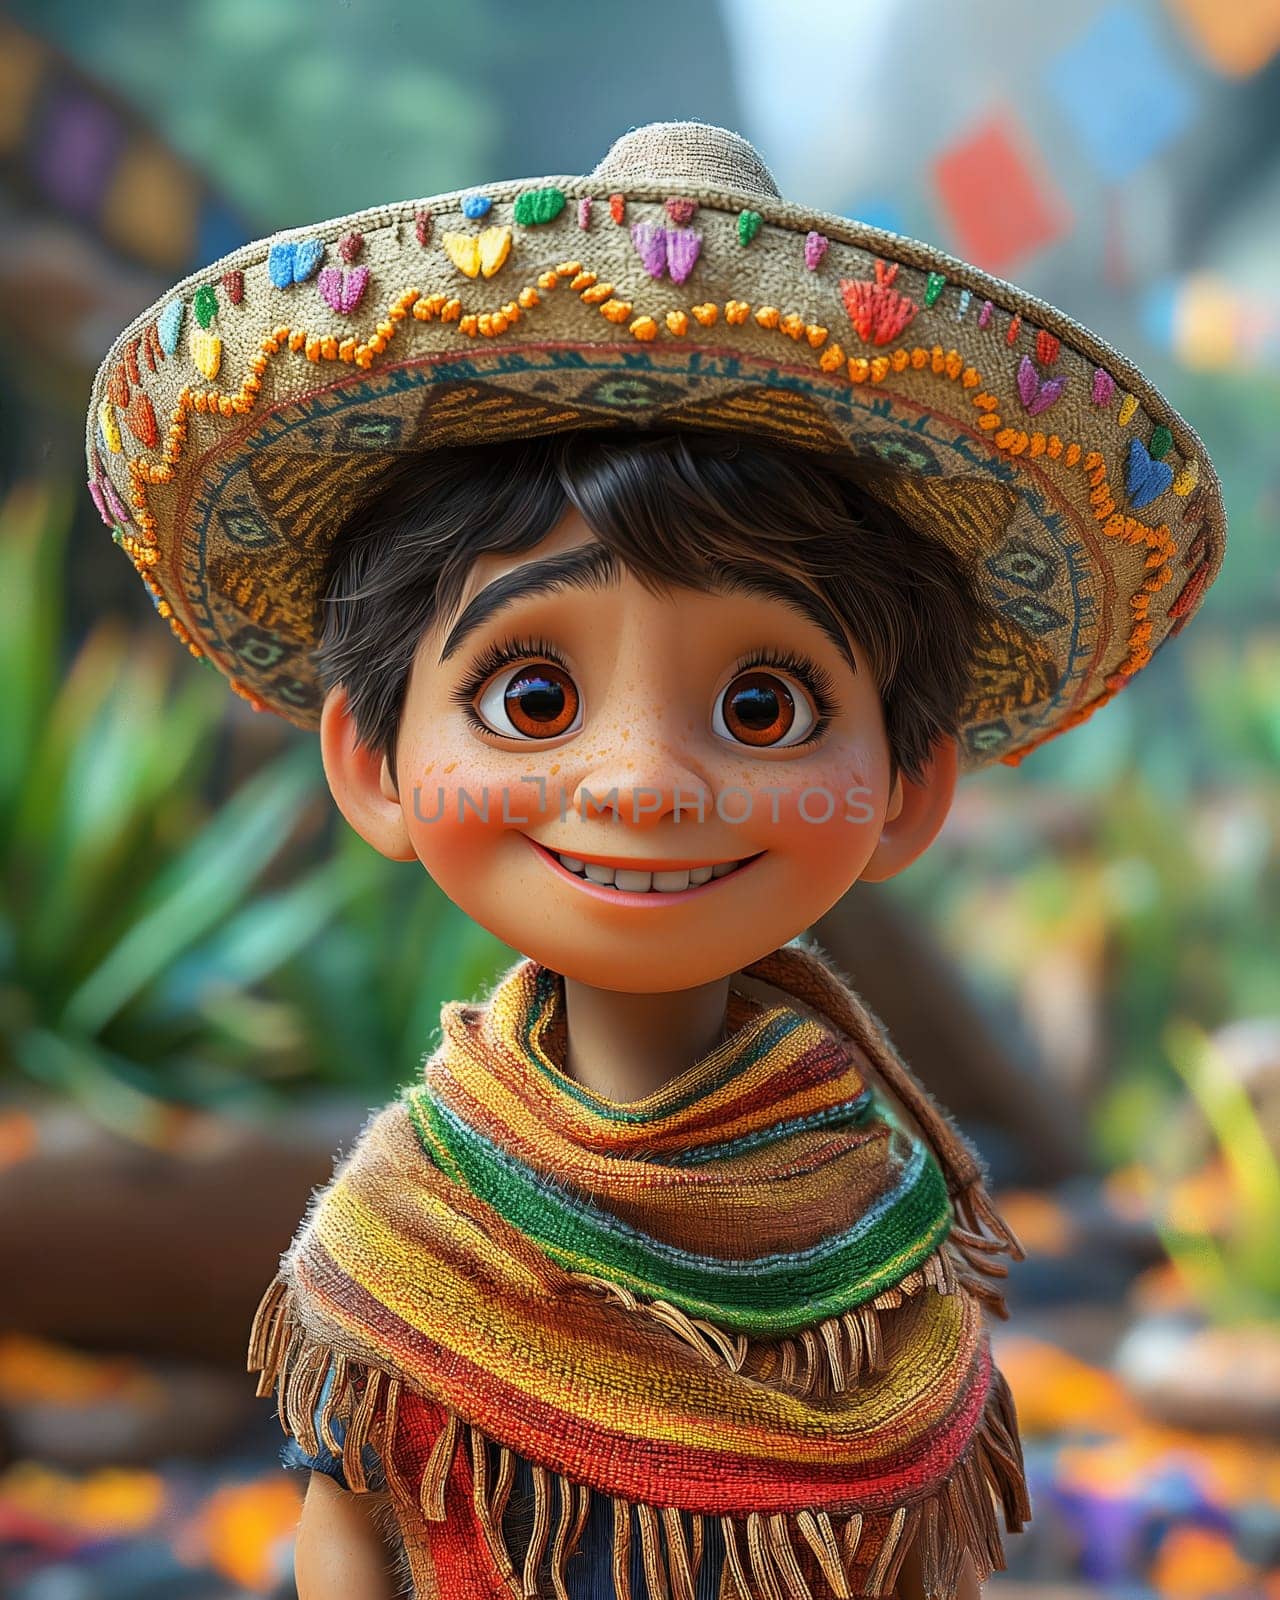 Cartoon, 3D boy in a sombrero and national dress. by Fischeron